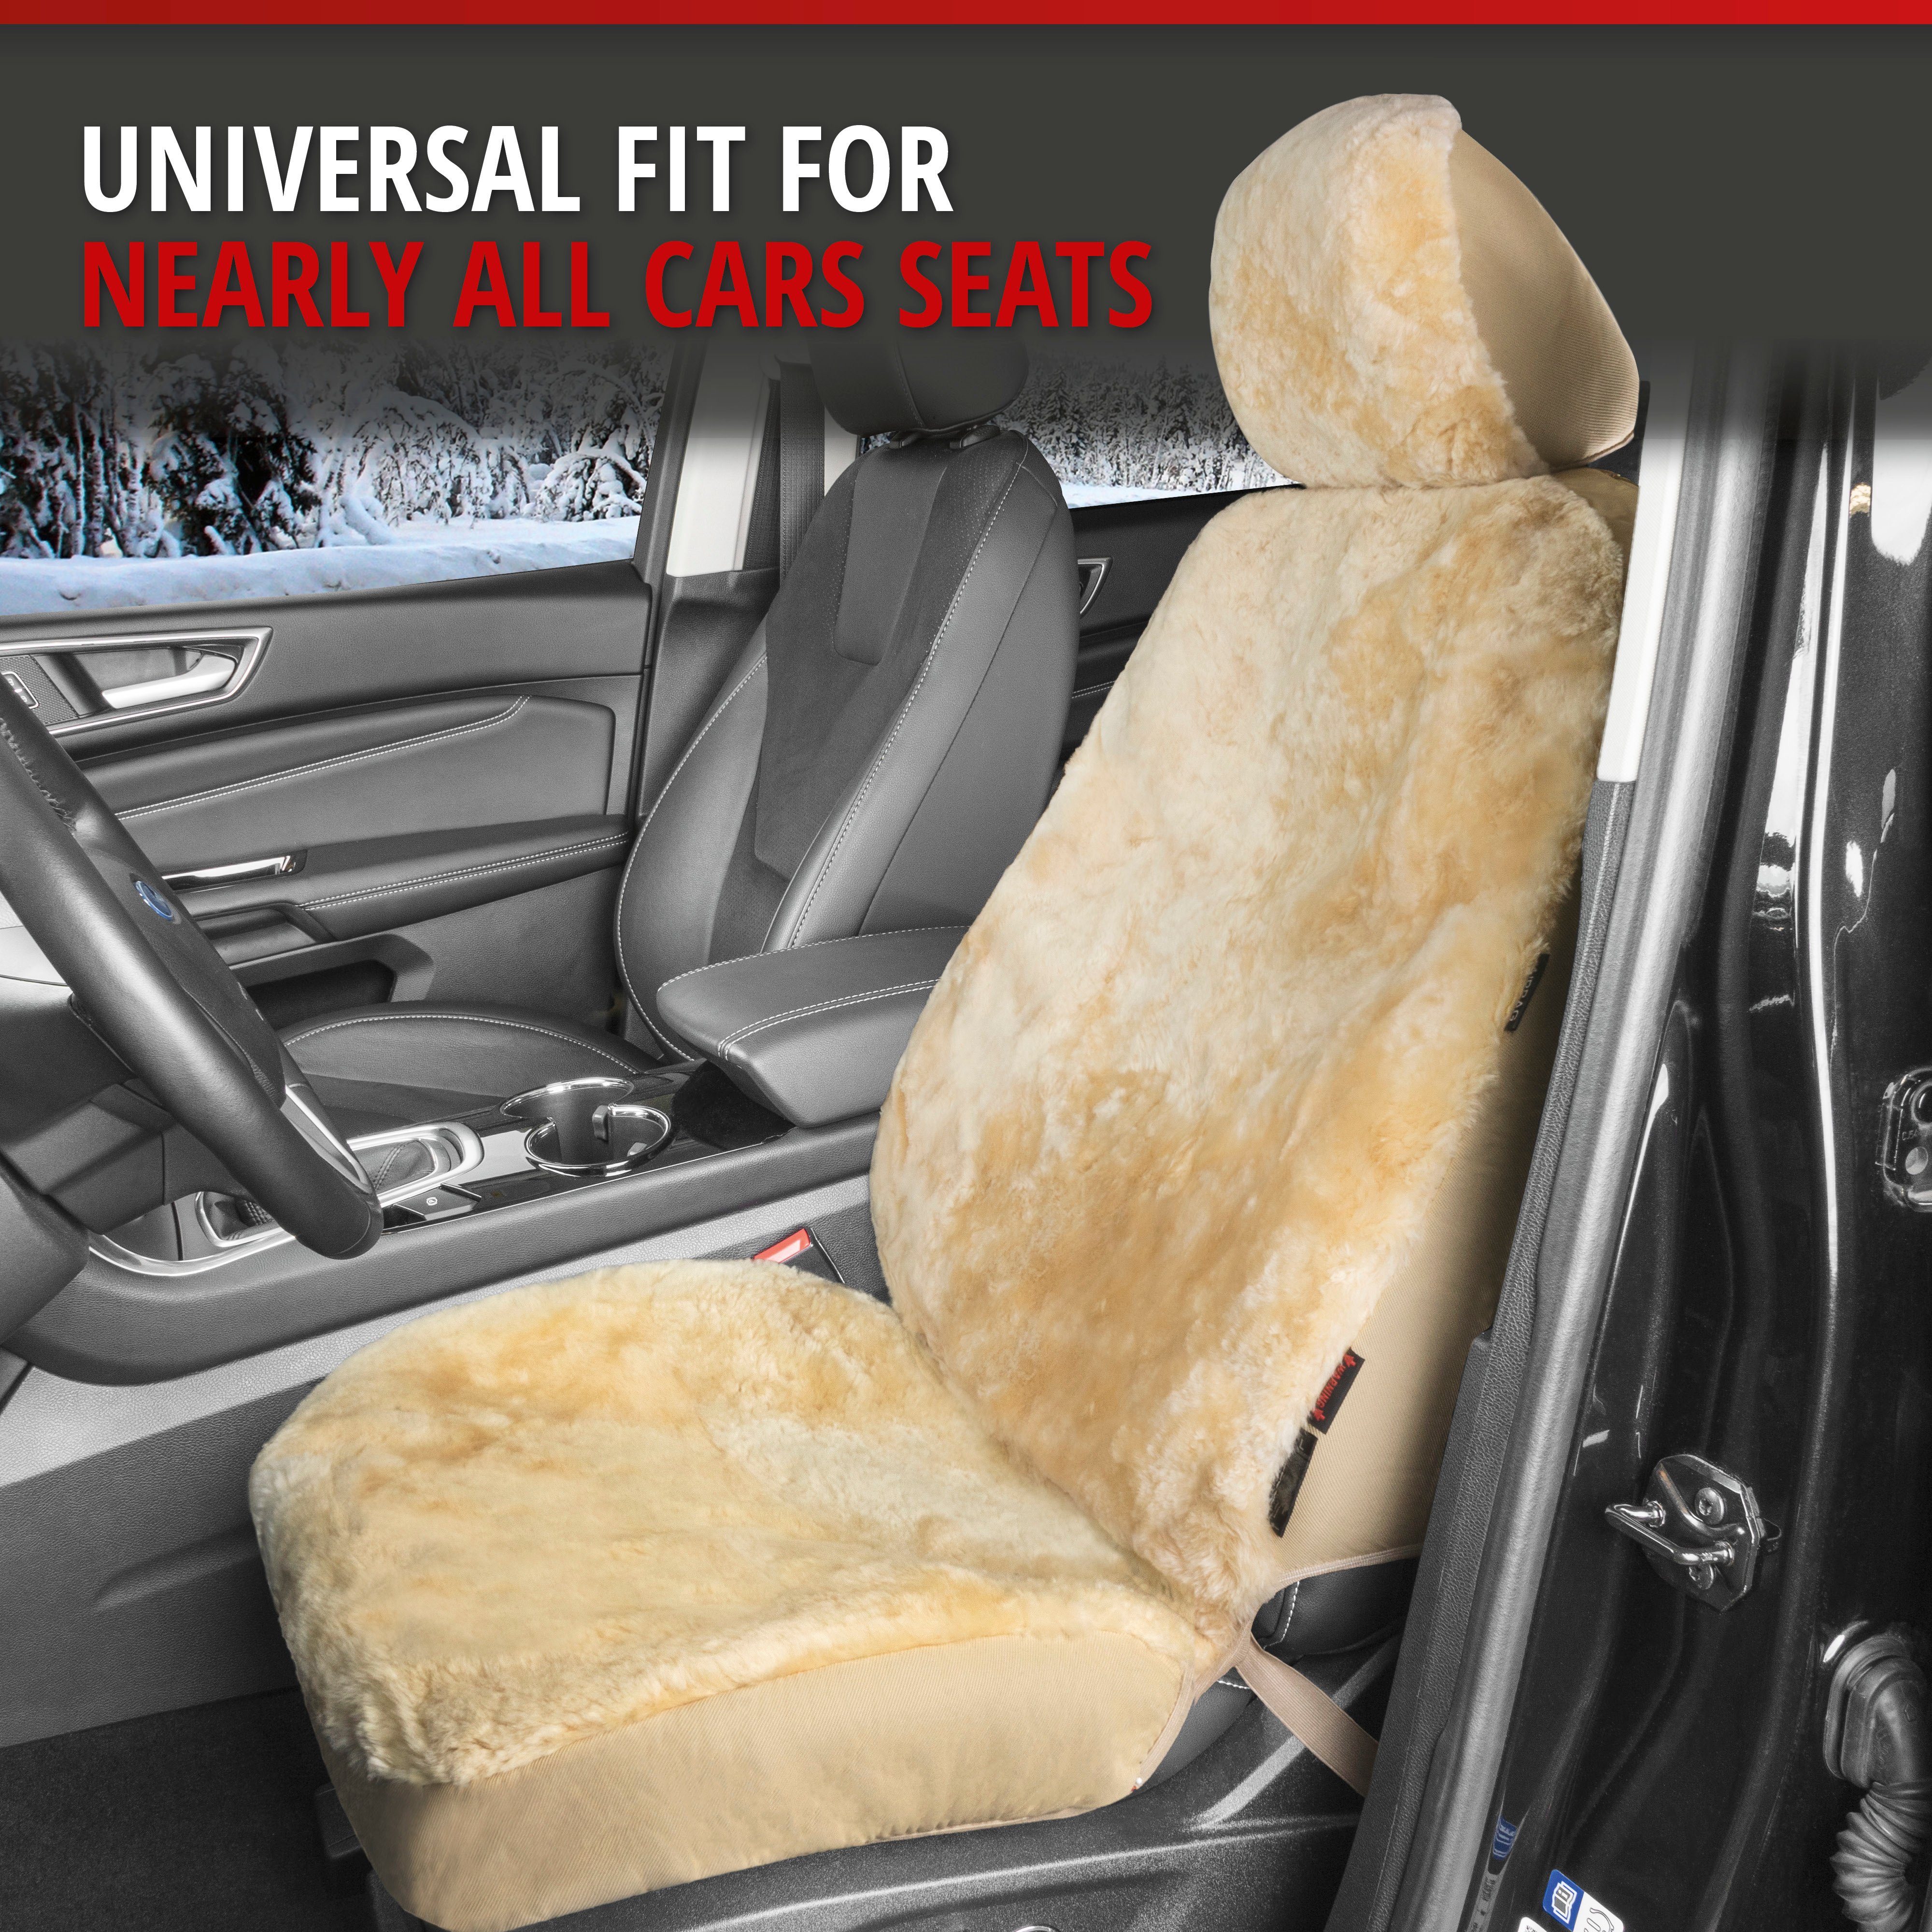 Car Seat cover Iva made of lambskin beige with ZIPP IT system